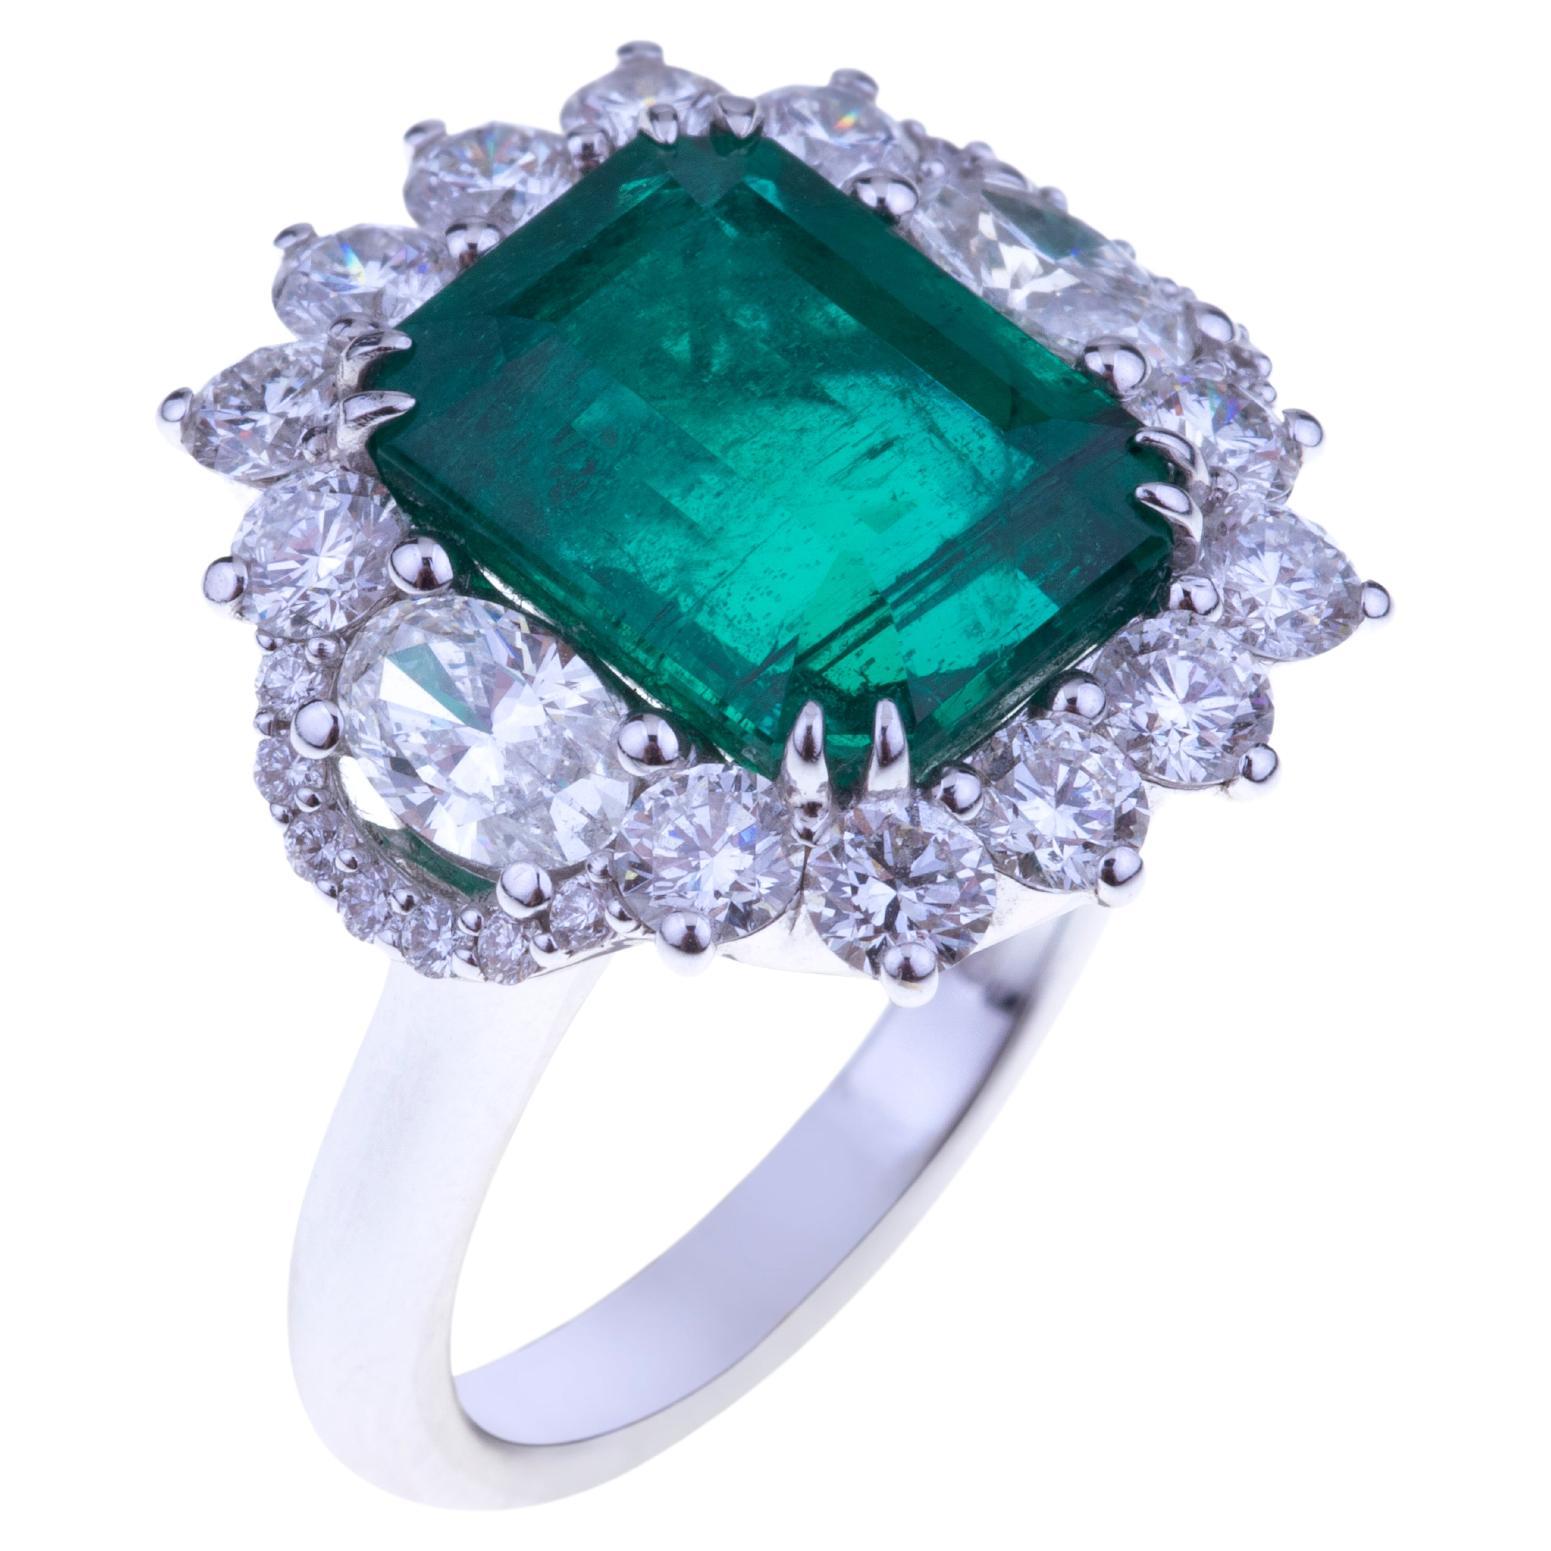 Stunning Emerald Ring Ct. 7.41 with Diamonds, Unique Stone with Certificate GRS For Sale